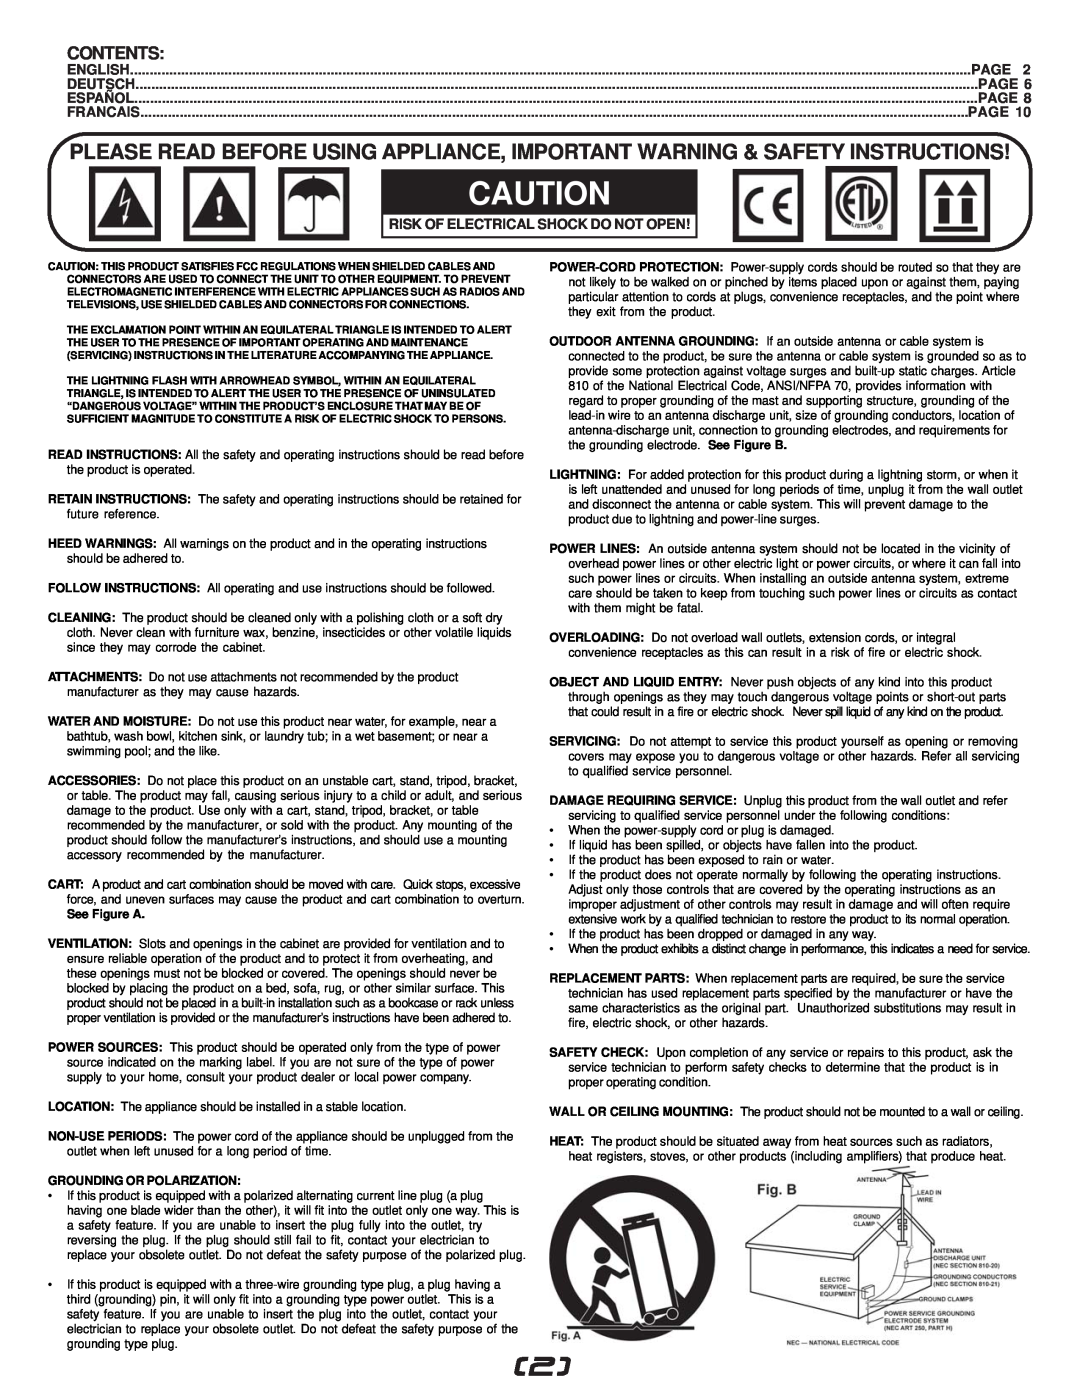 Gemini CDJ-15X manual Page, Risk Of Electrical Shock Do Not Open, Francais, See Figure A, Grounding Or Polarization 